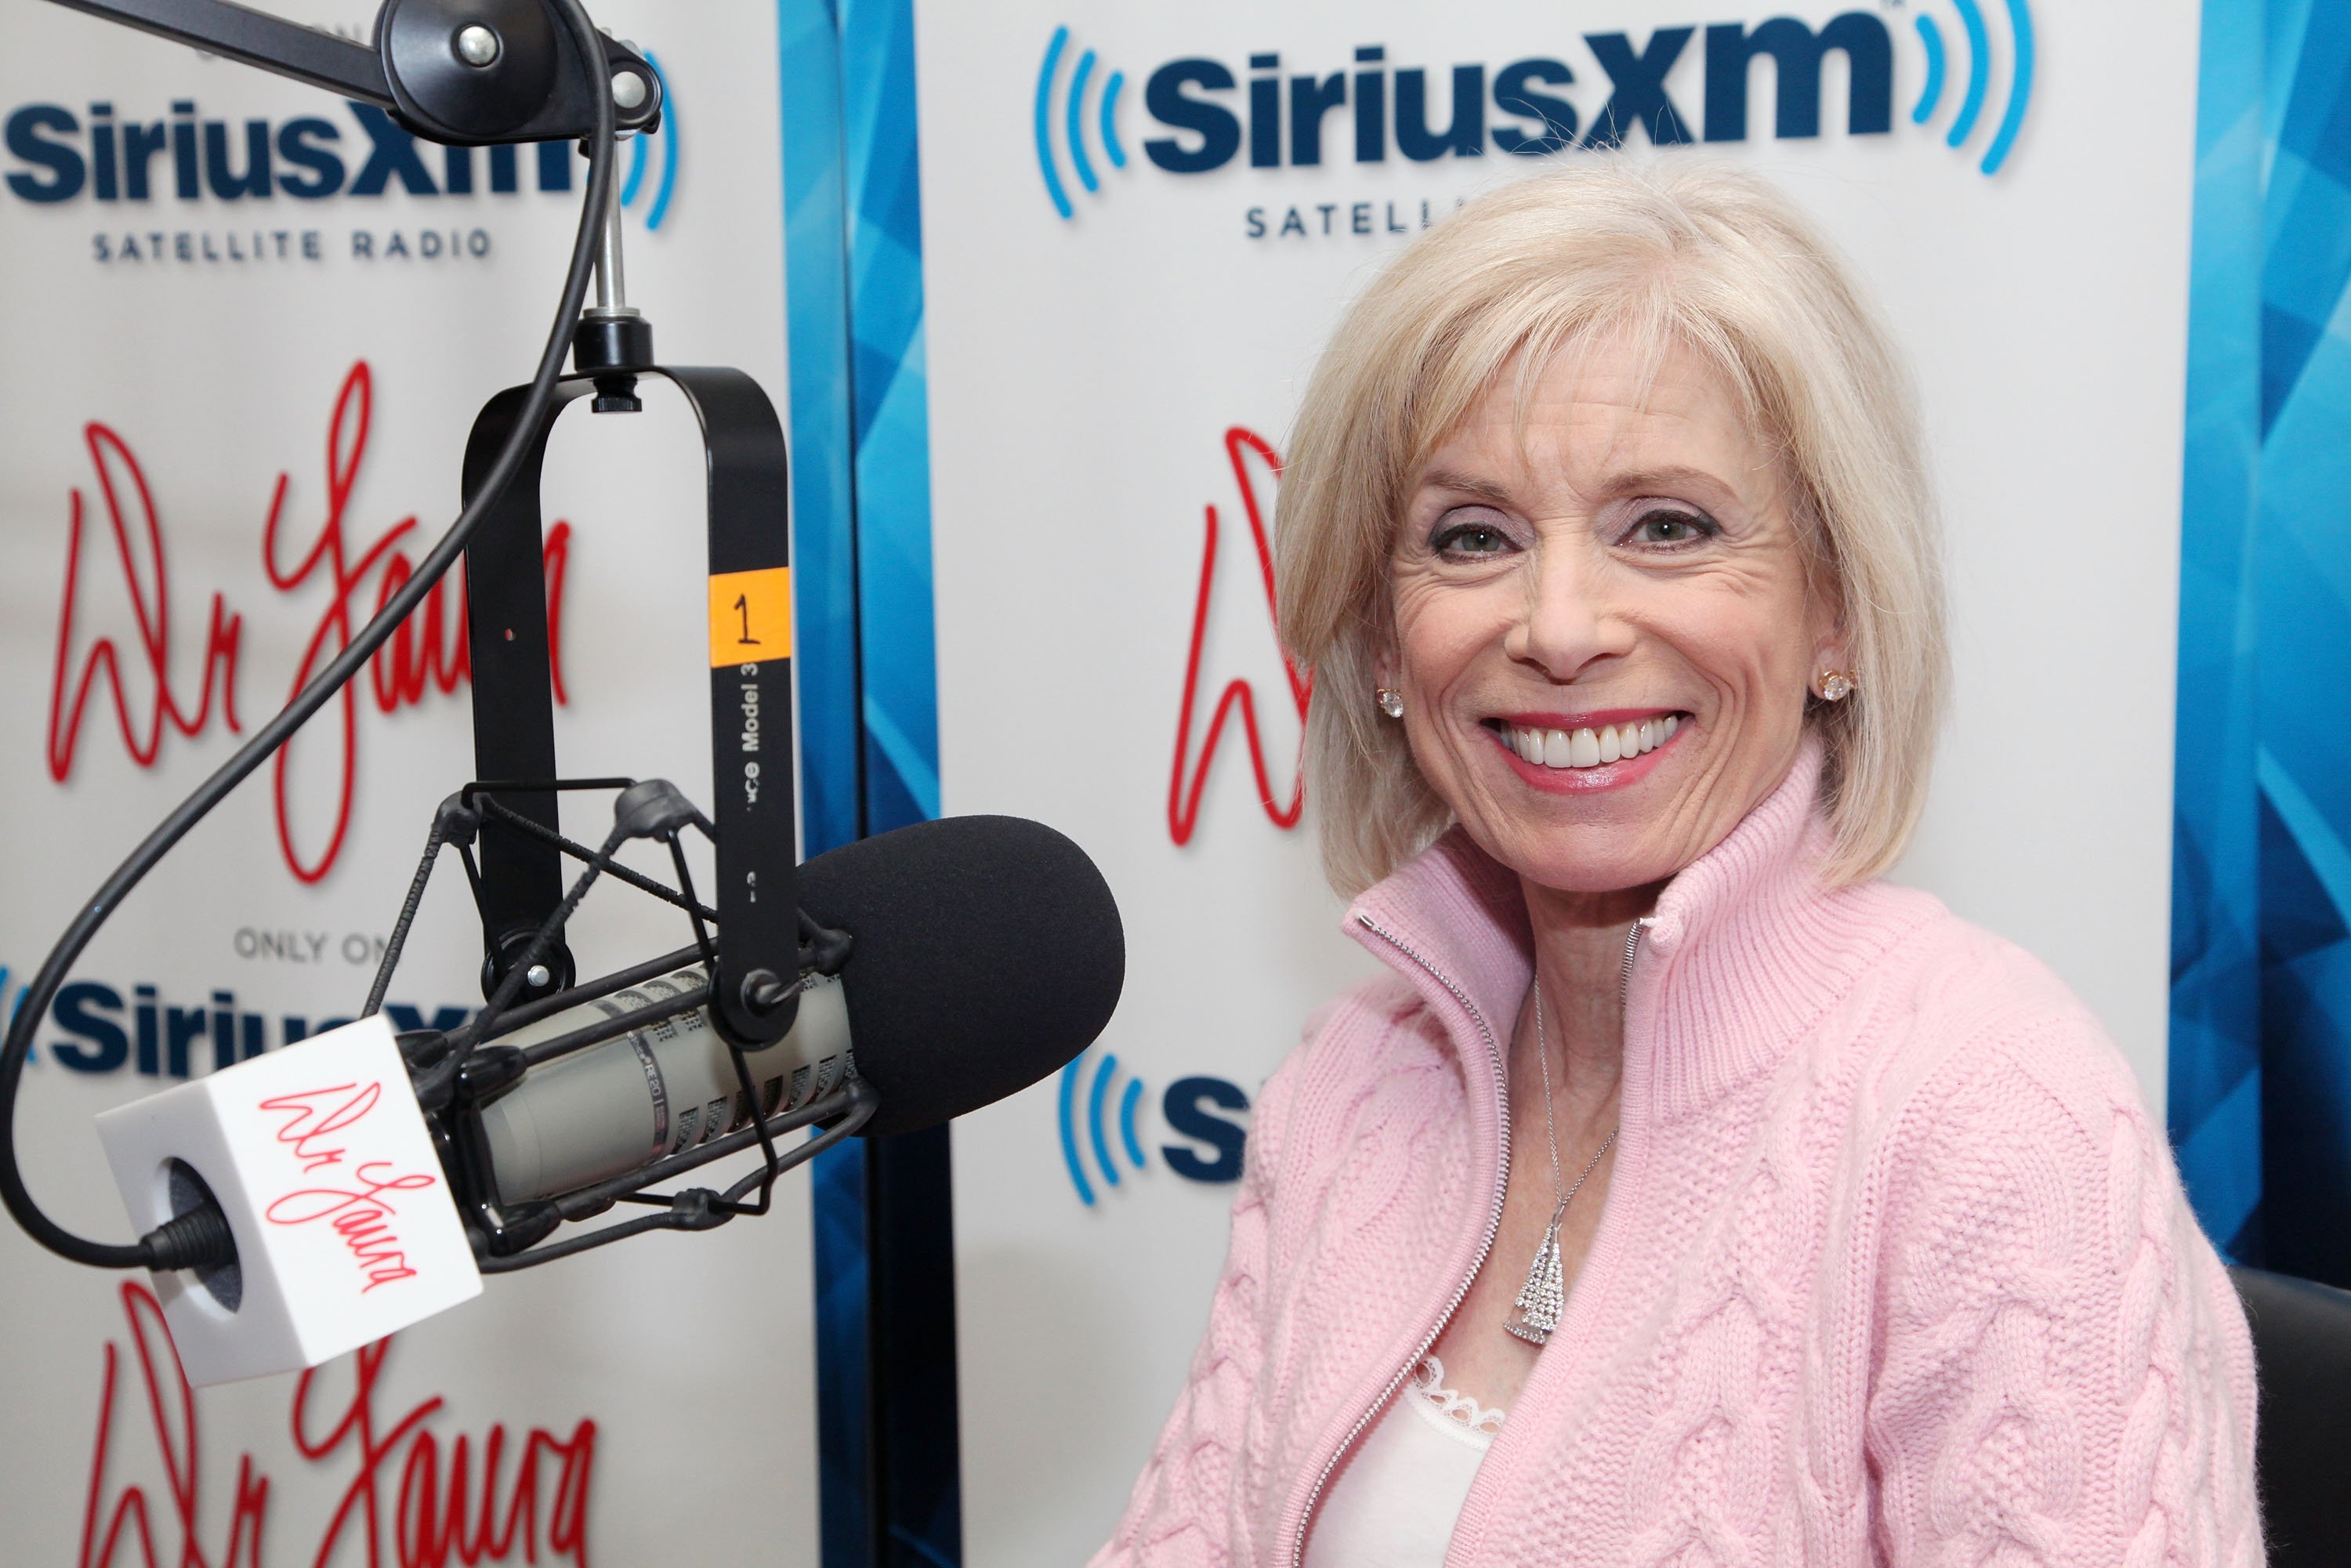 Dr. Laura Schlessinger broadcasts her exclusive SiriusXM show "Dr. Laura" from SiriusXM studios on January 20, 2011, in New York City. | Source: Getty Images.